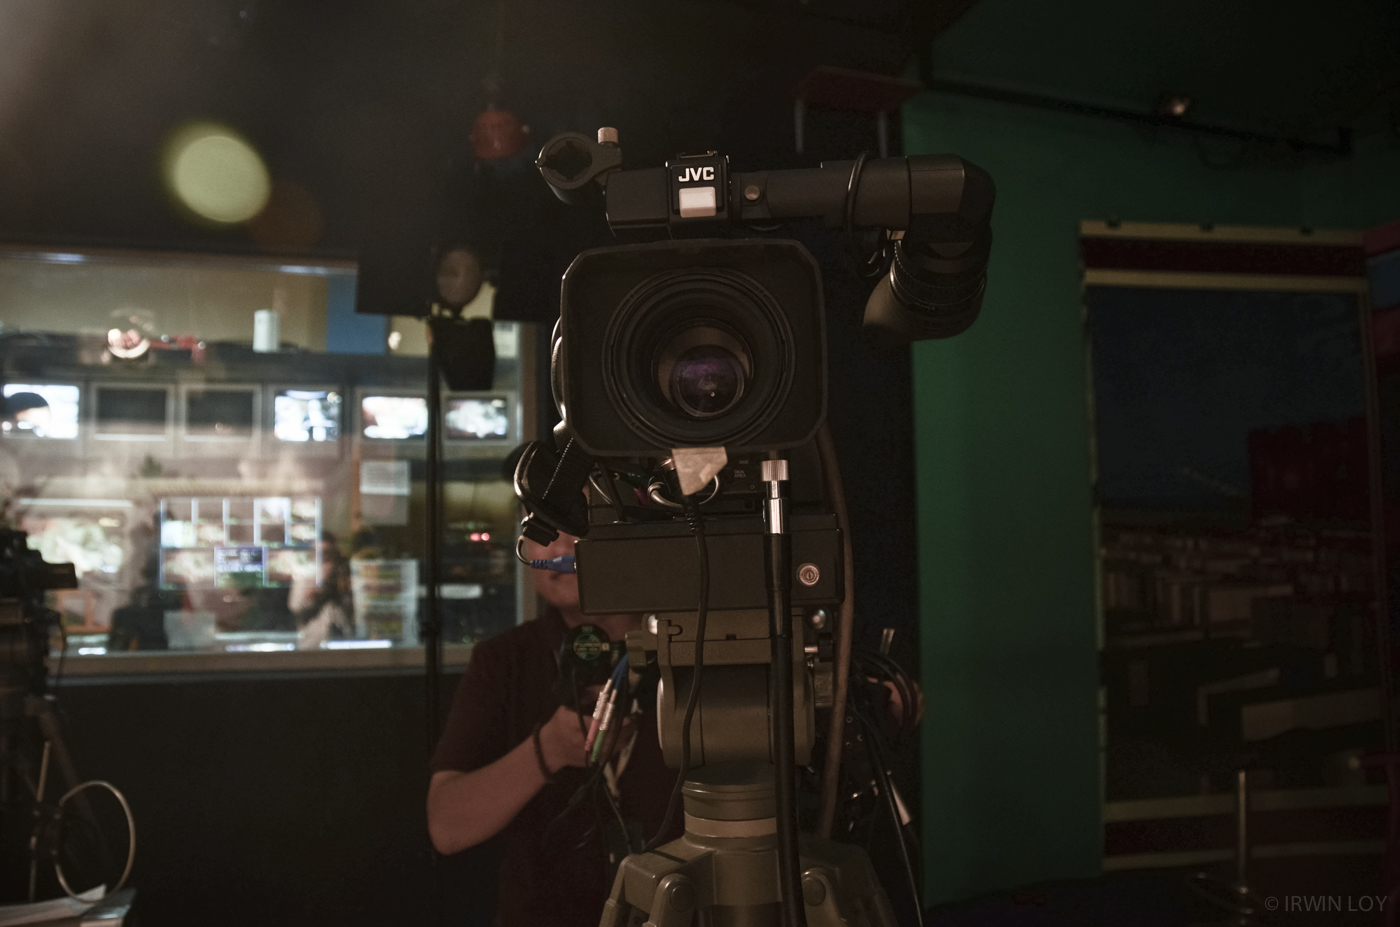  A camera operator gets ready to film the evening newscast at RuaiTV, a community TV station in Pontianak, West Kalimantan. 